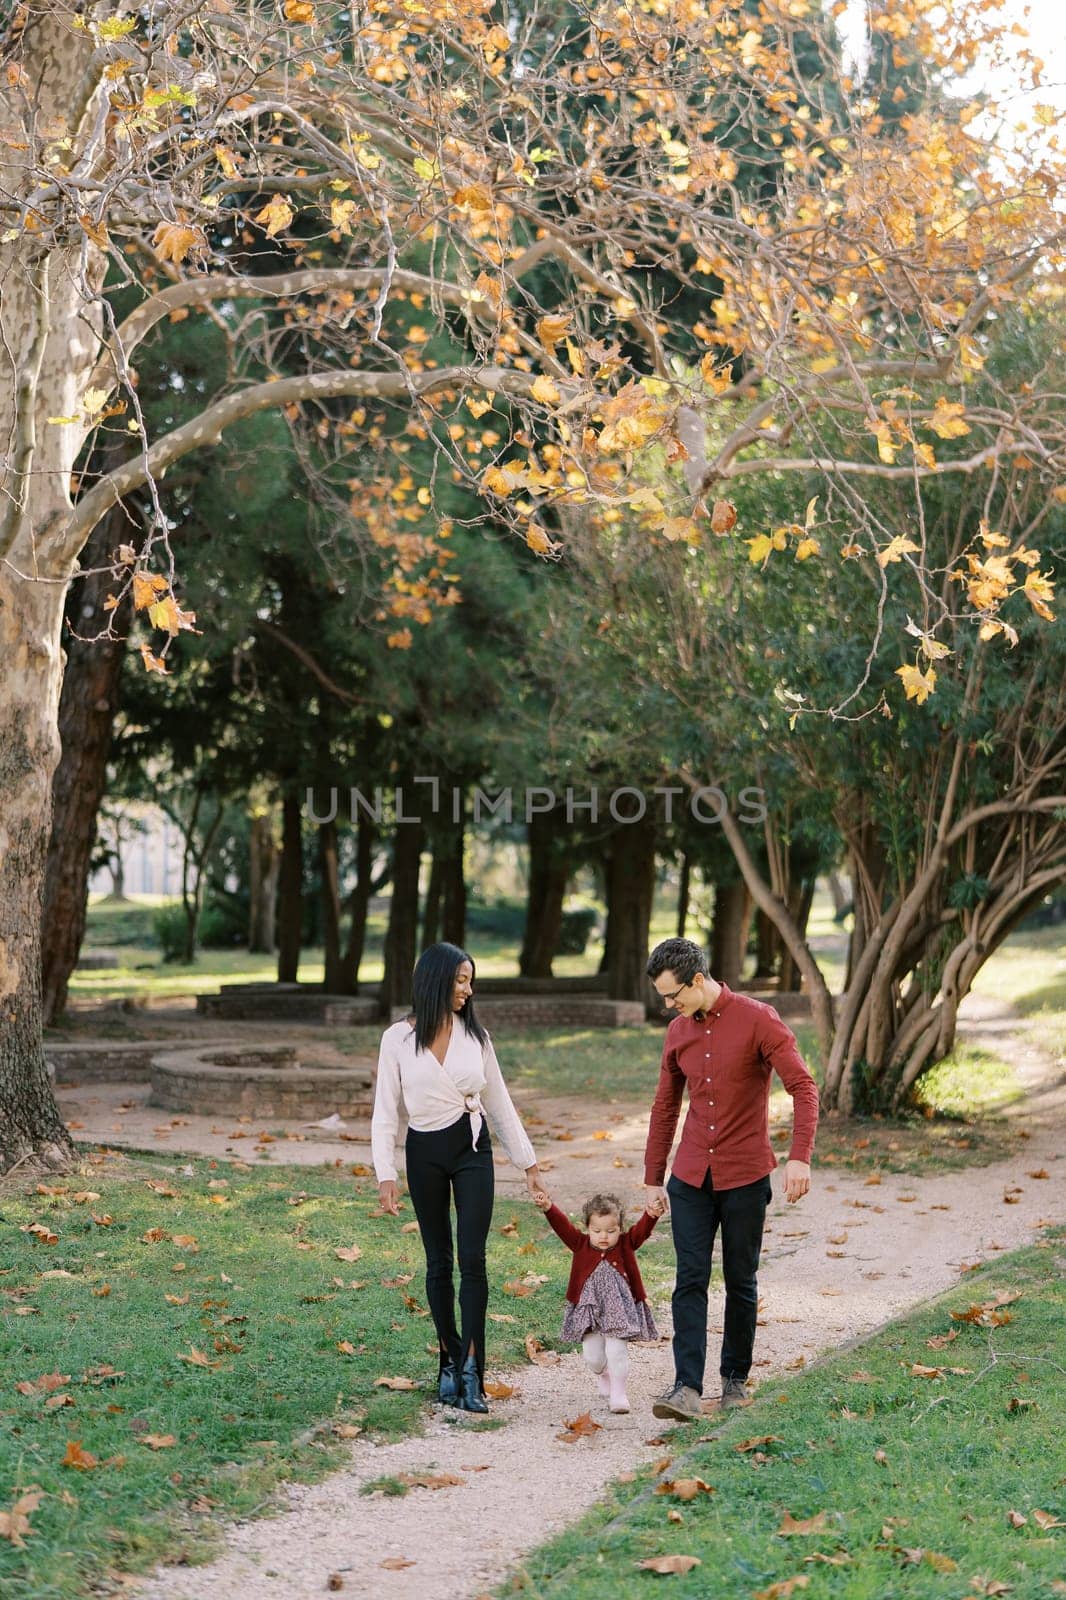 Mom and dad with a little girl walk along the path in the park, holding hands by Nadtochiy